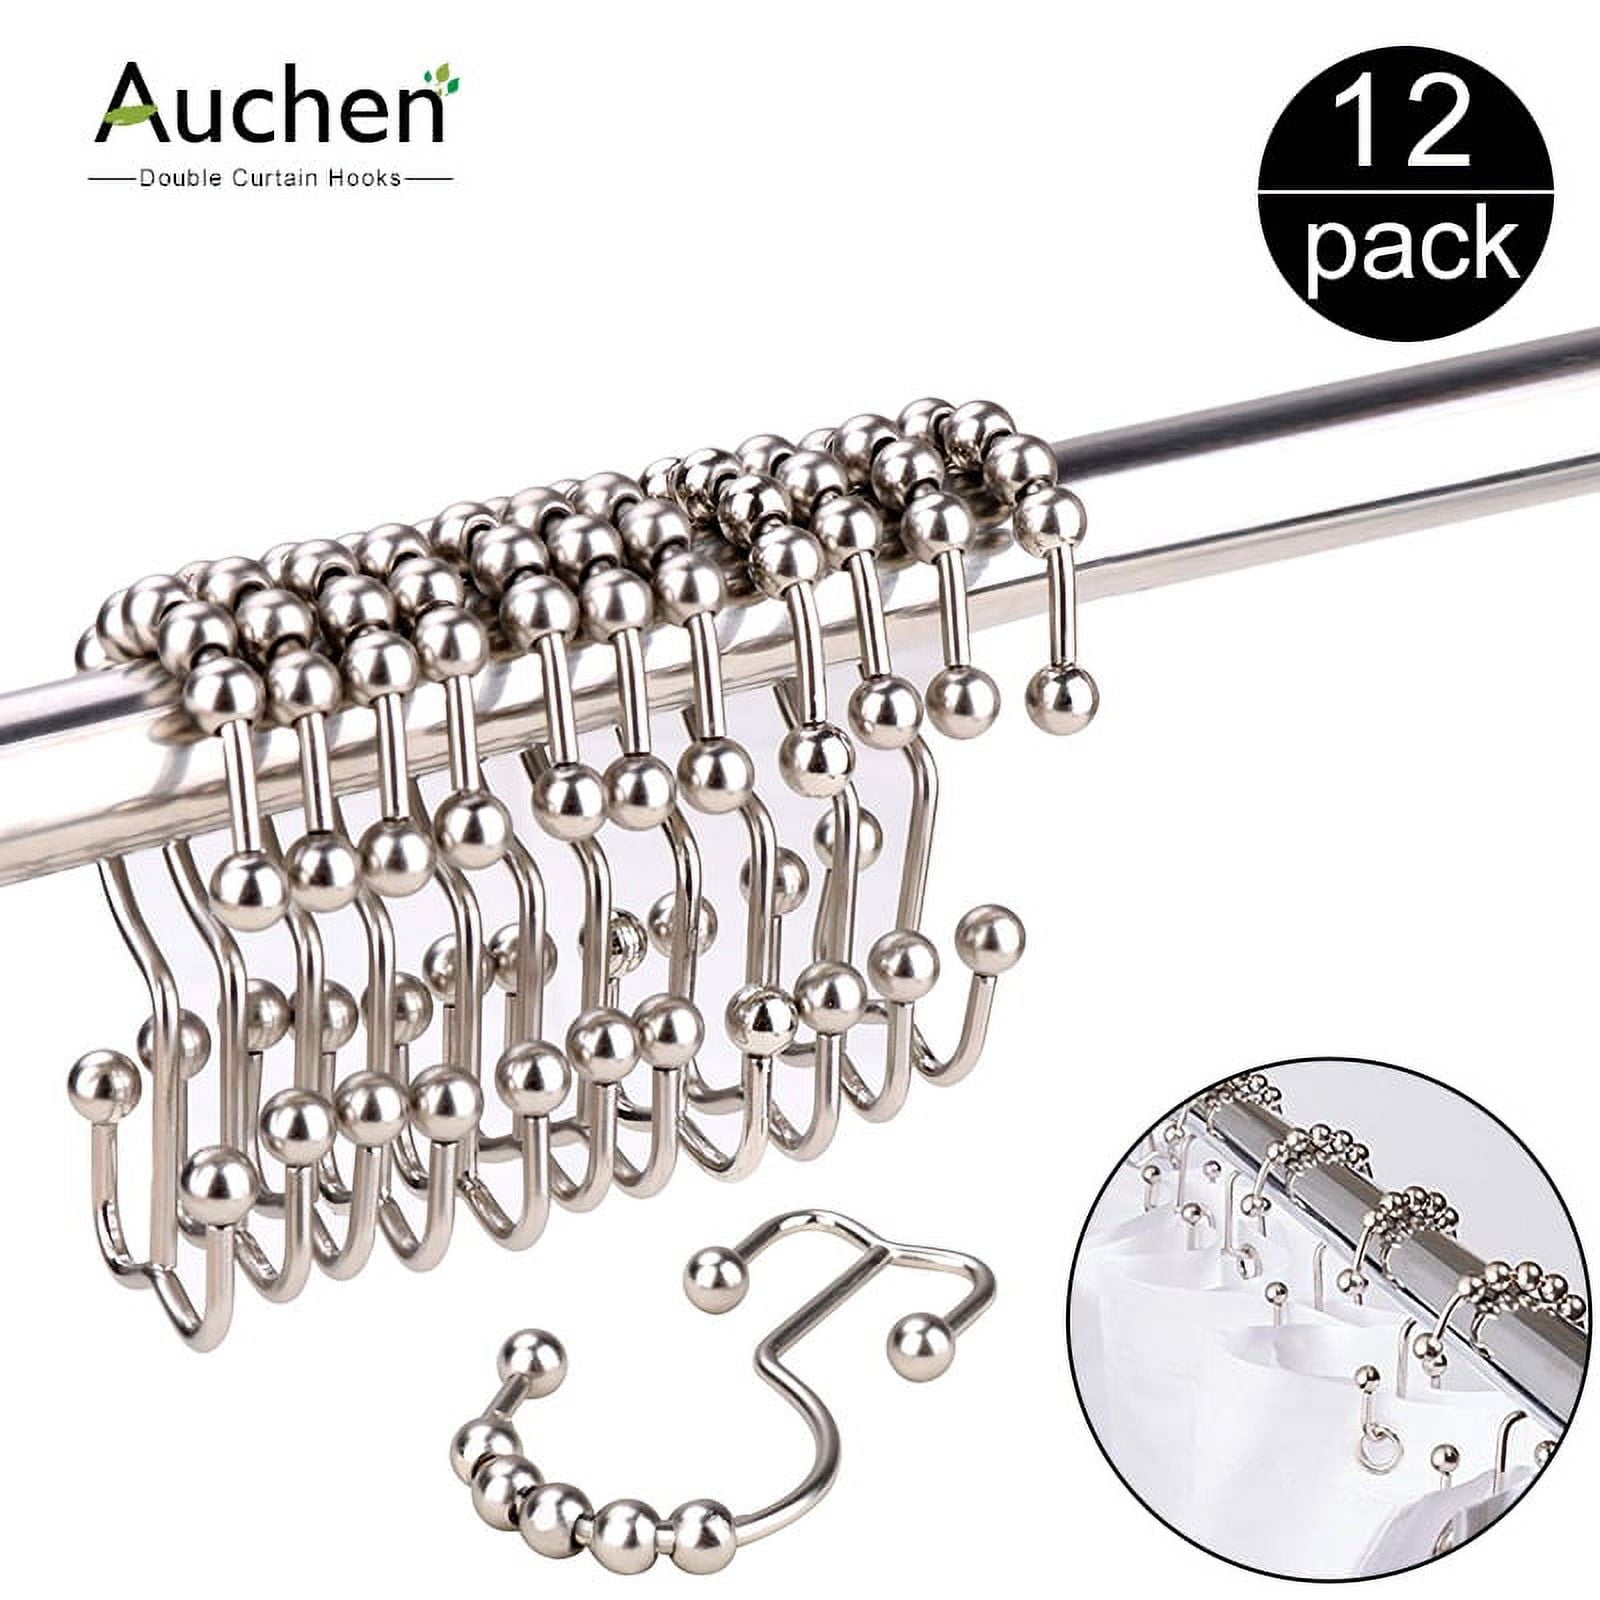 Auchen New Upgraded Set of 12 Shower Curtain Hooks,Stainless Steel Metal Double Curtain Rings for Shower Rods Curtains-Premium 18/8 Stainless Steel